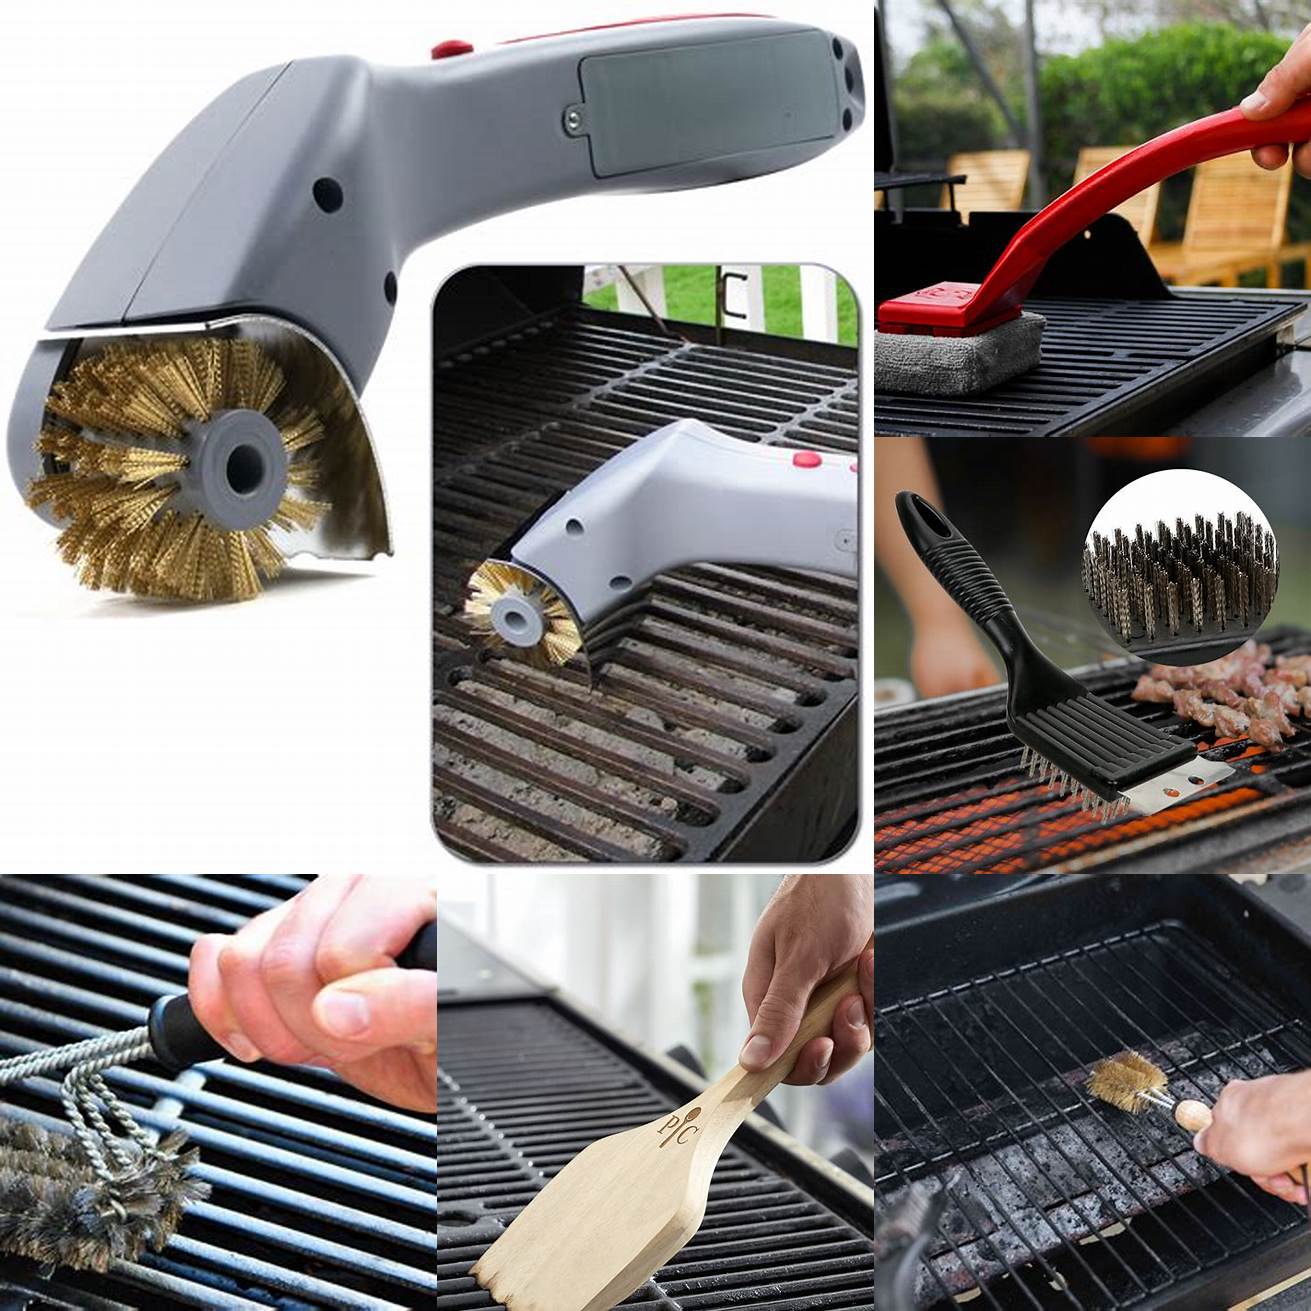 Cleaning a grill with a brush